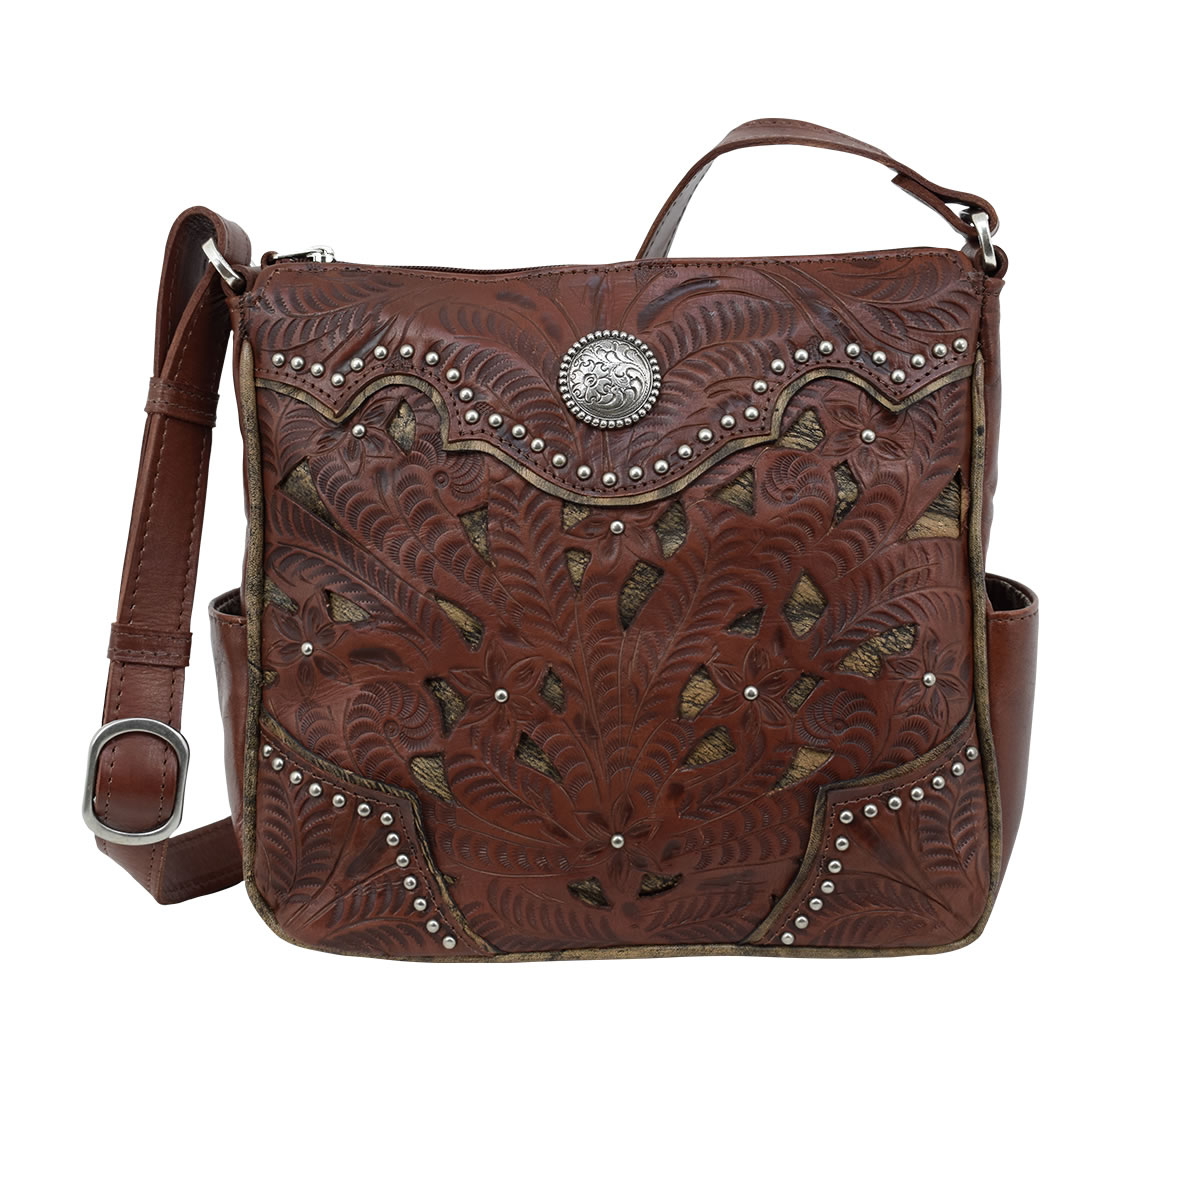 Western leather purse - clothing & accessories - by owner - apparel sale -  craigslist